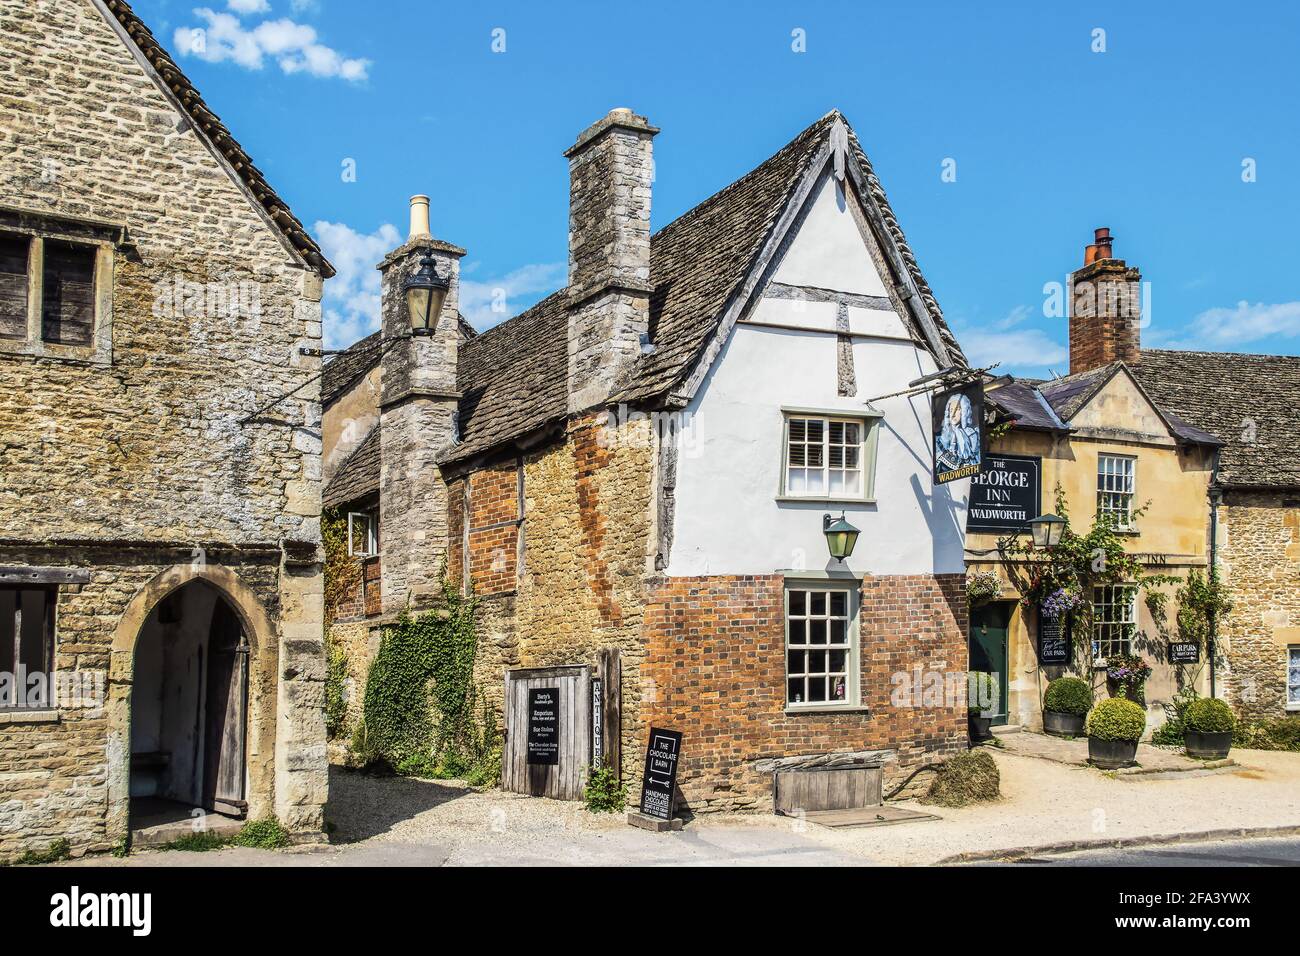 July 25 2019 Lacock UK - Street scene and alley in Cotswold village of Lacock where scenes from Downton Abbey were shot - the George Inn- Wadworth Stock Photo